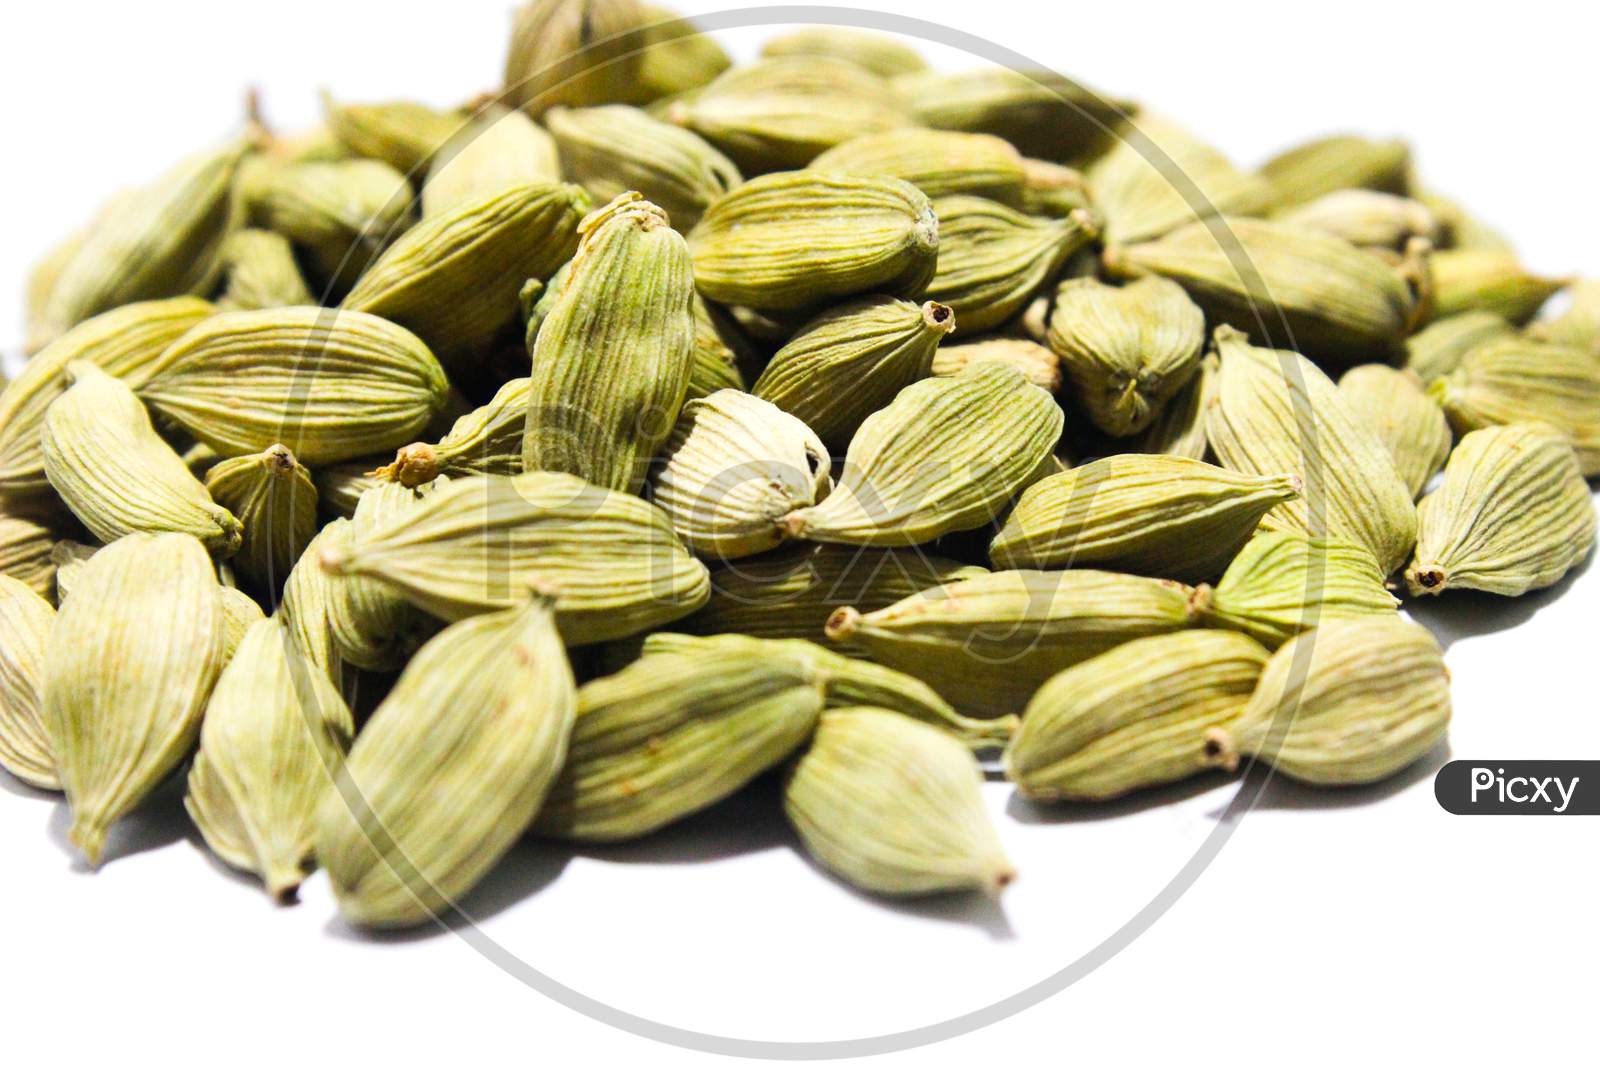 A picture of cardamom